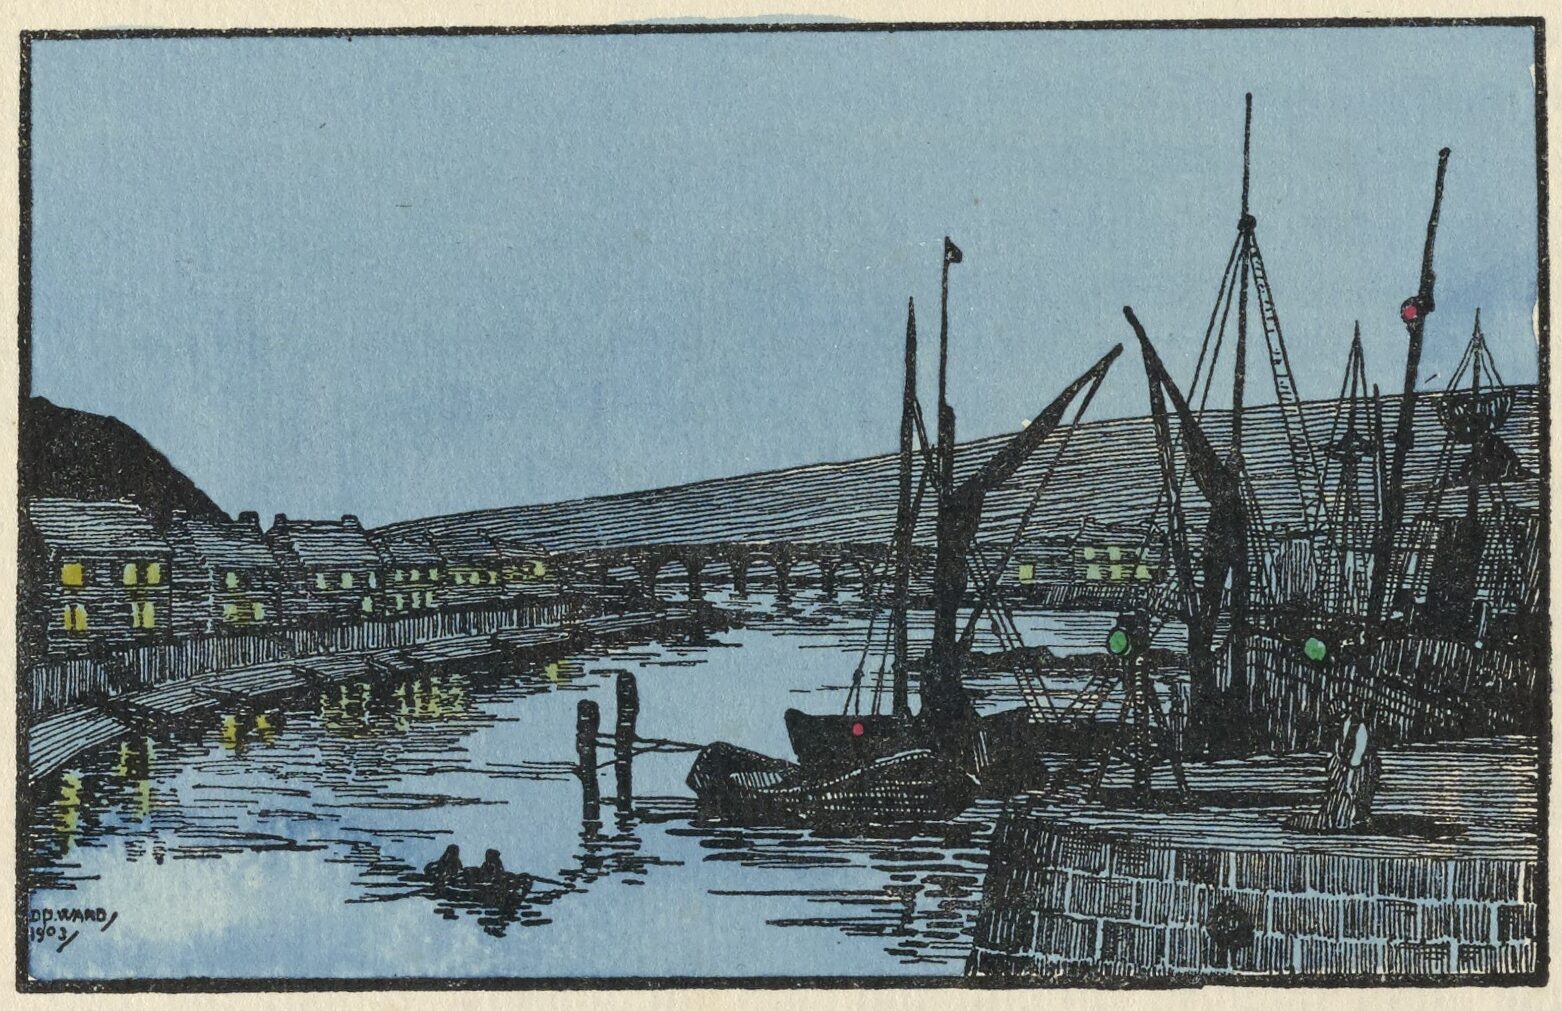 The hand-coloured headpiece is outlined with a thick black rectangular frame, in landscape orientation. It depicts a night scene of a river harbour. On the left, a row of houses circles the water, yellow lights visible in the windows. To the right, several ships are in black silhouette, with small green lights visible on the starboard side. Two figures sit in a small dinghy on the water. In the background, an arched bridge connects the two sides of the harbour. Dark hills are set against the subdued blue sky.